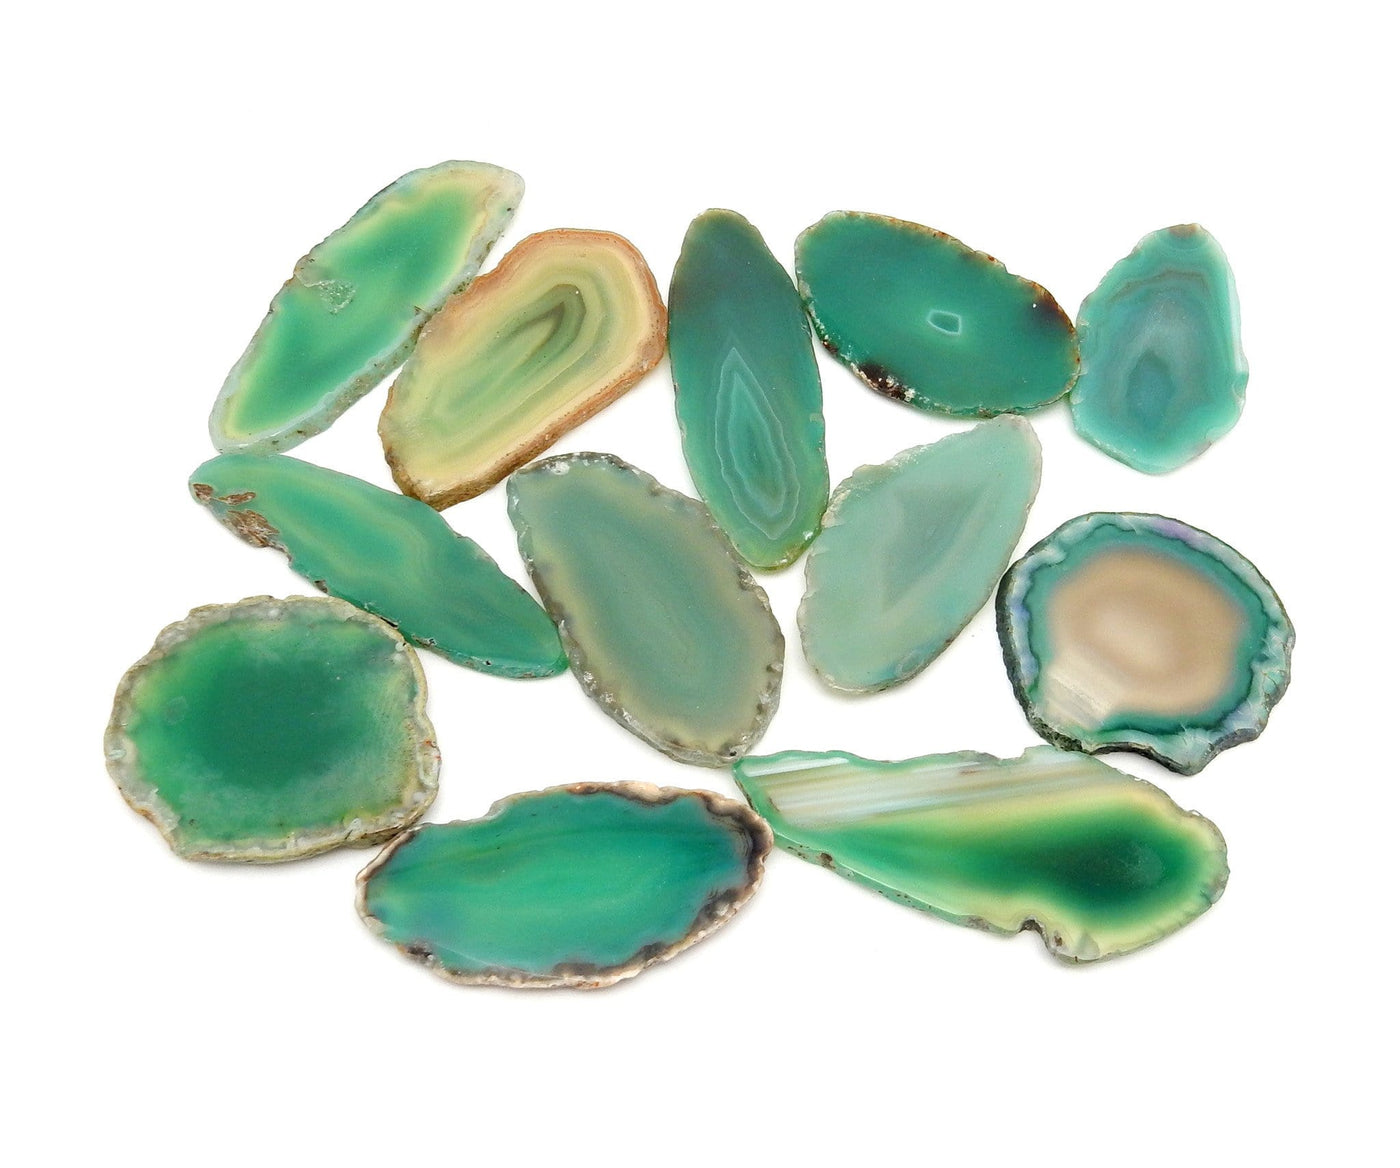 Agate Slices - Green Agate Slices - a bunch scattered on a table